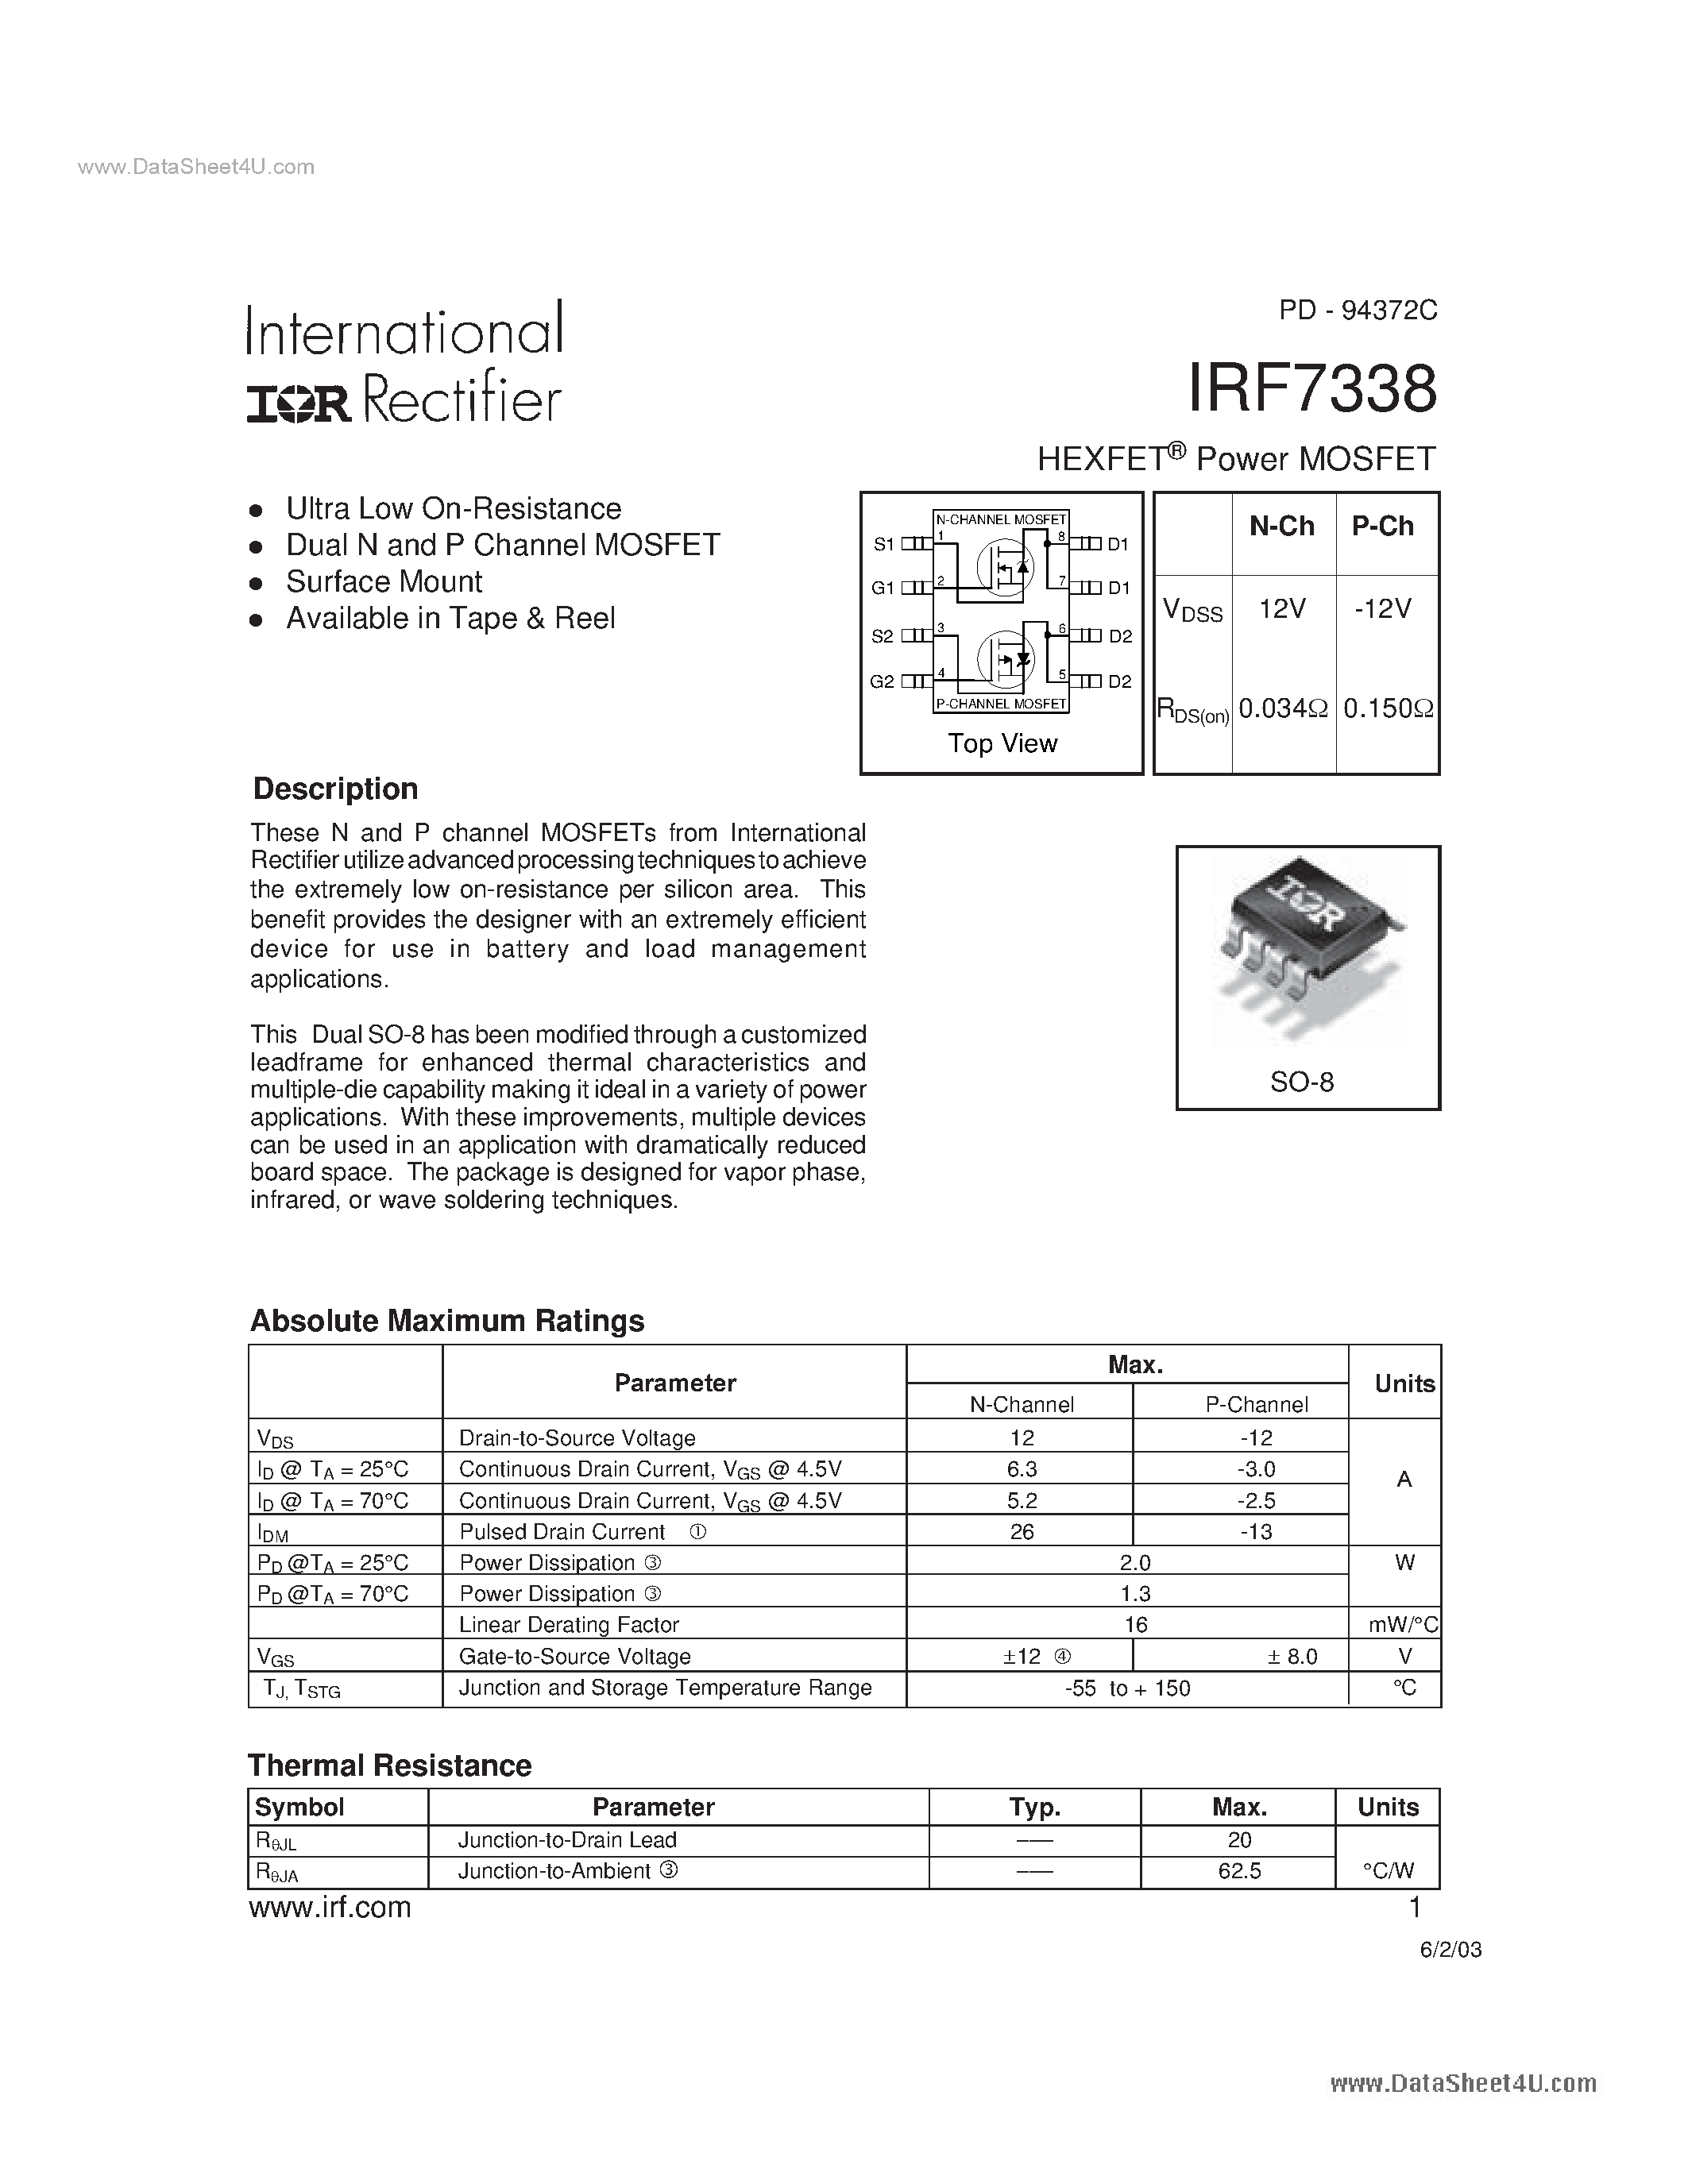 Datasheet F7338 - Search -----> IRF7338 page 1